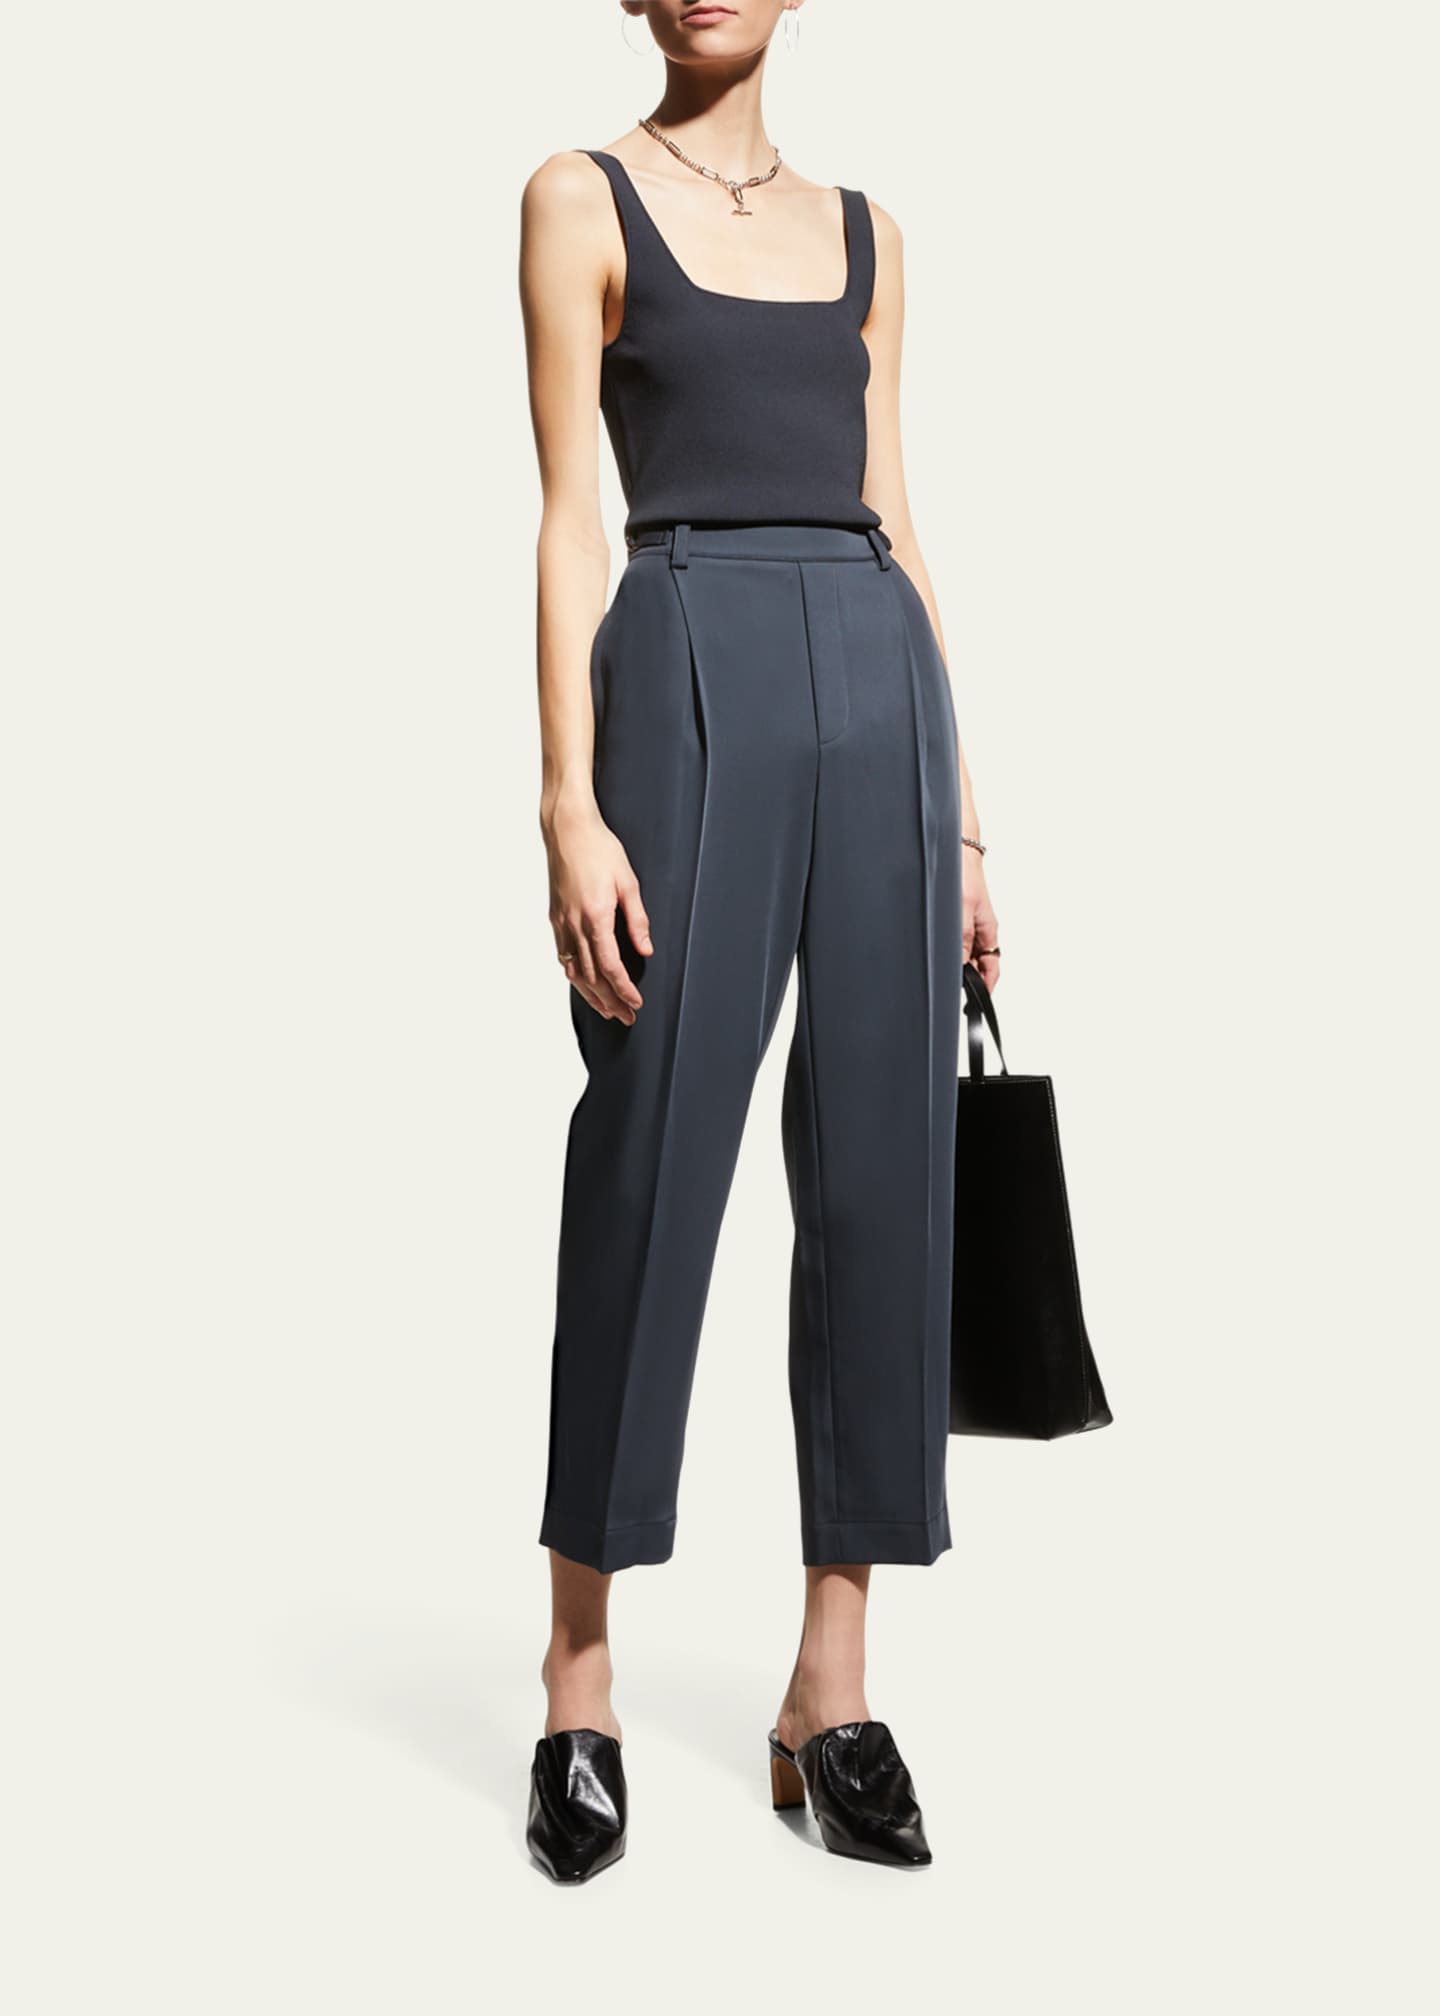 Vince Tapered Pull-On Pants - Bergdorf Goodman